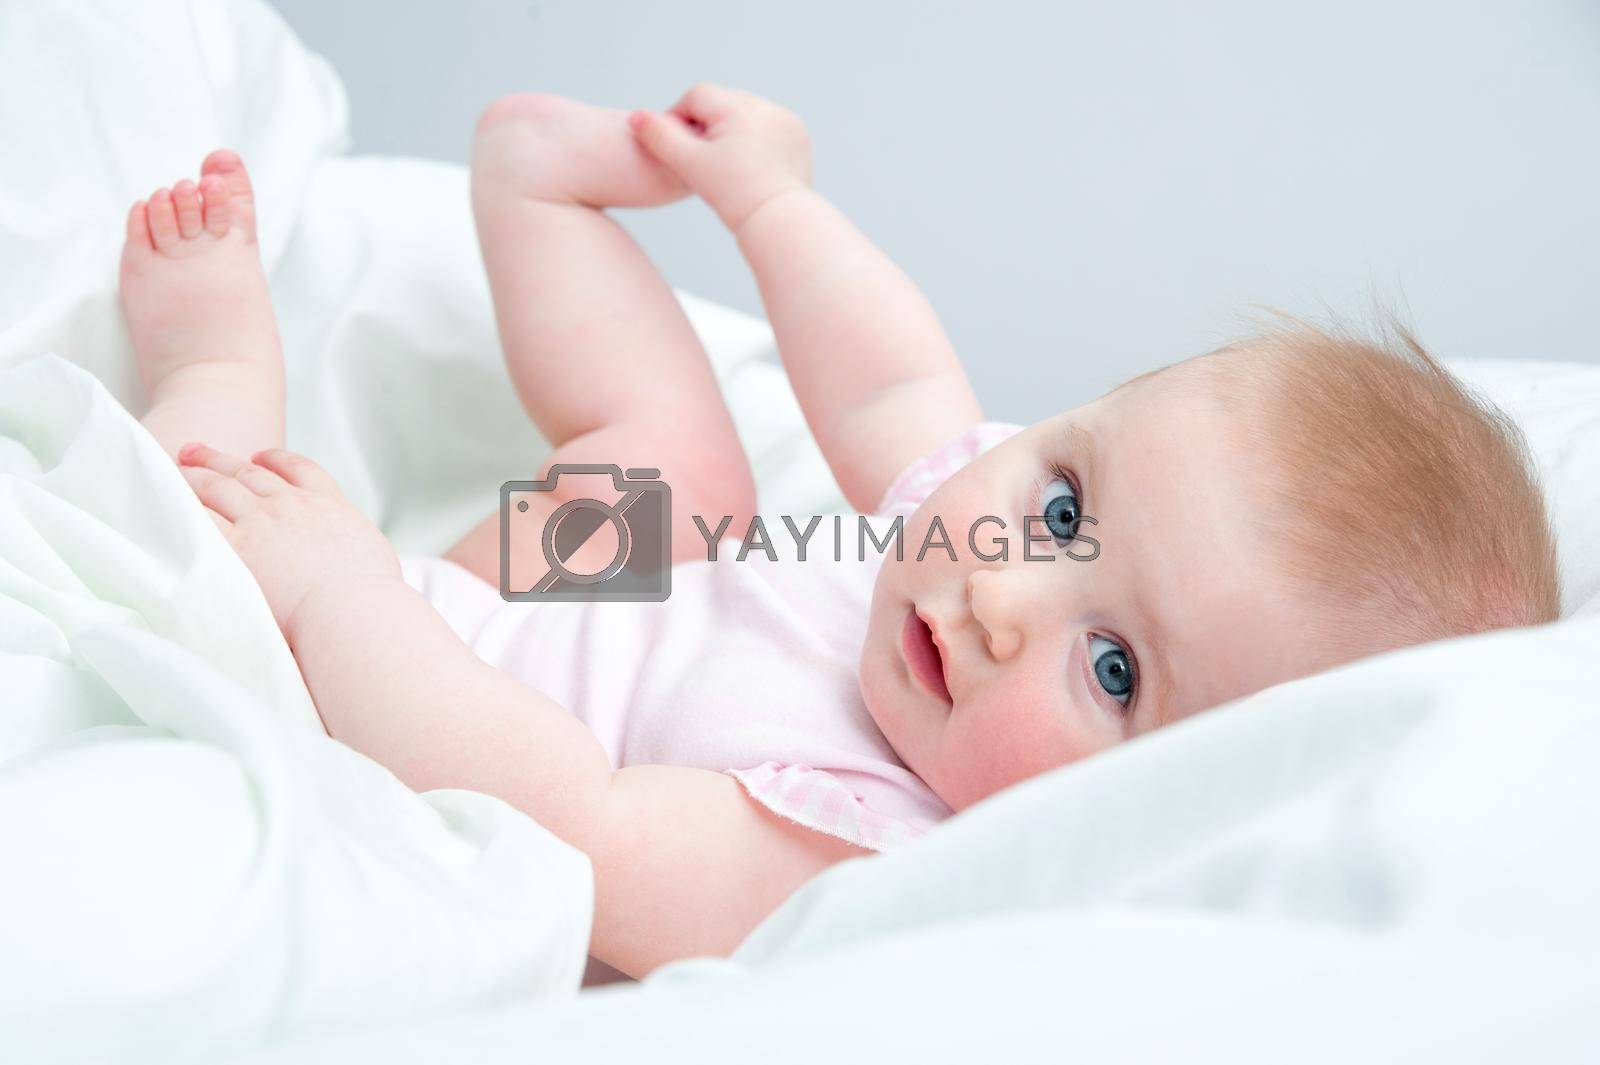 Royalty free image of baby playing with his feet by tan4ikk1